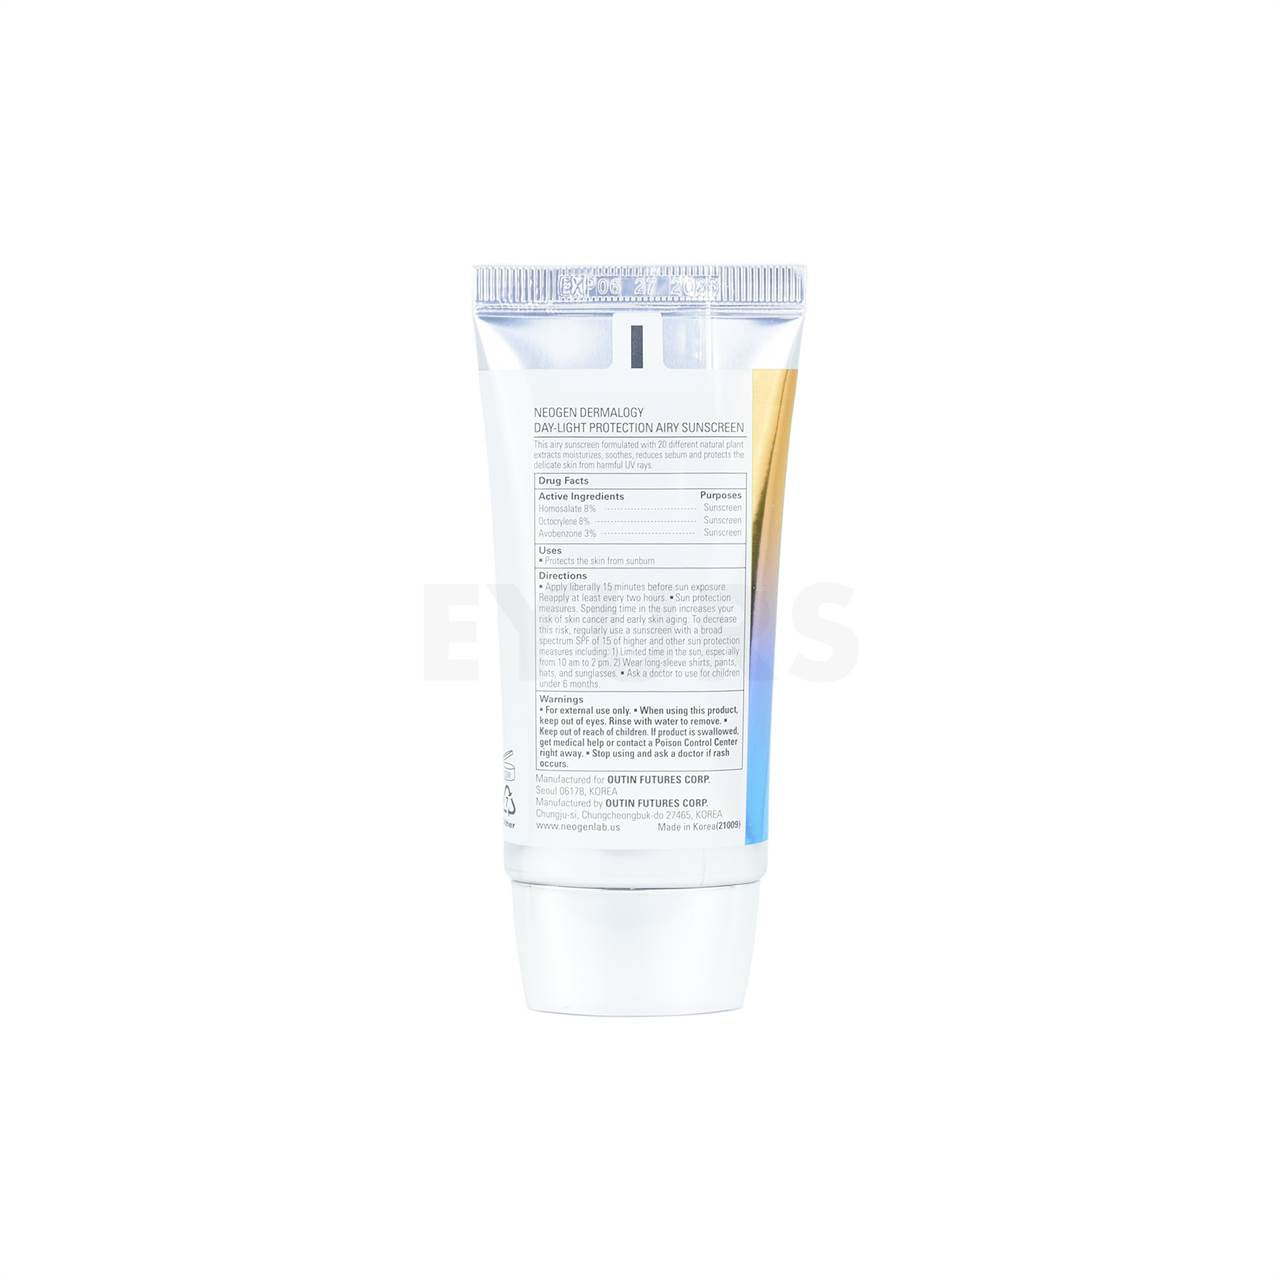 neogen dermalogy day light protection airy sunscreen back of product